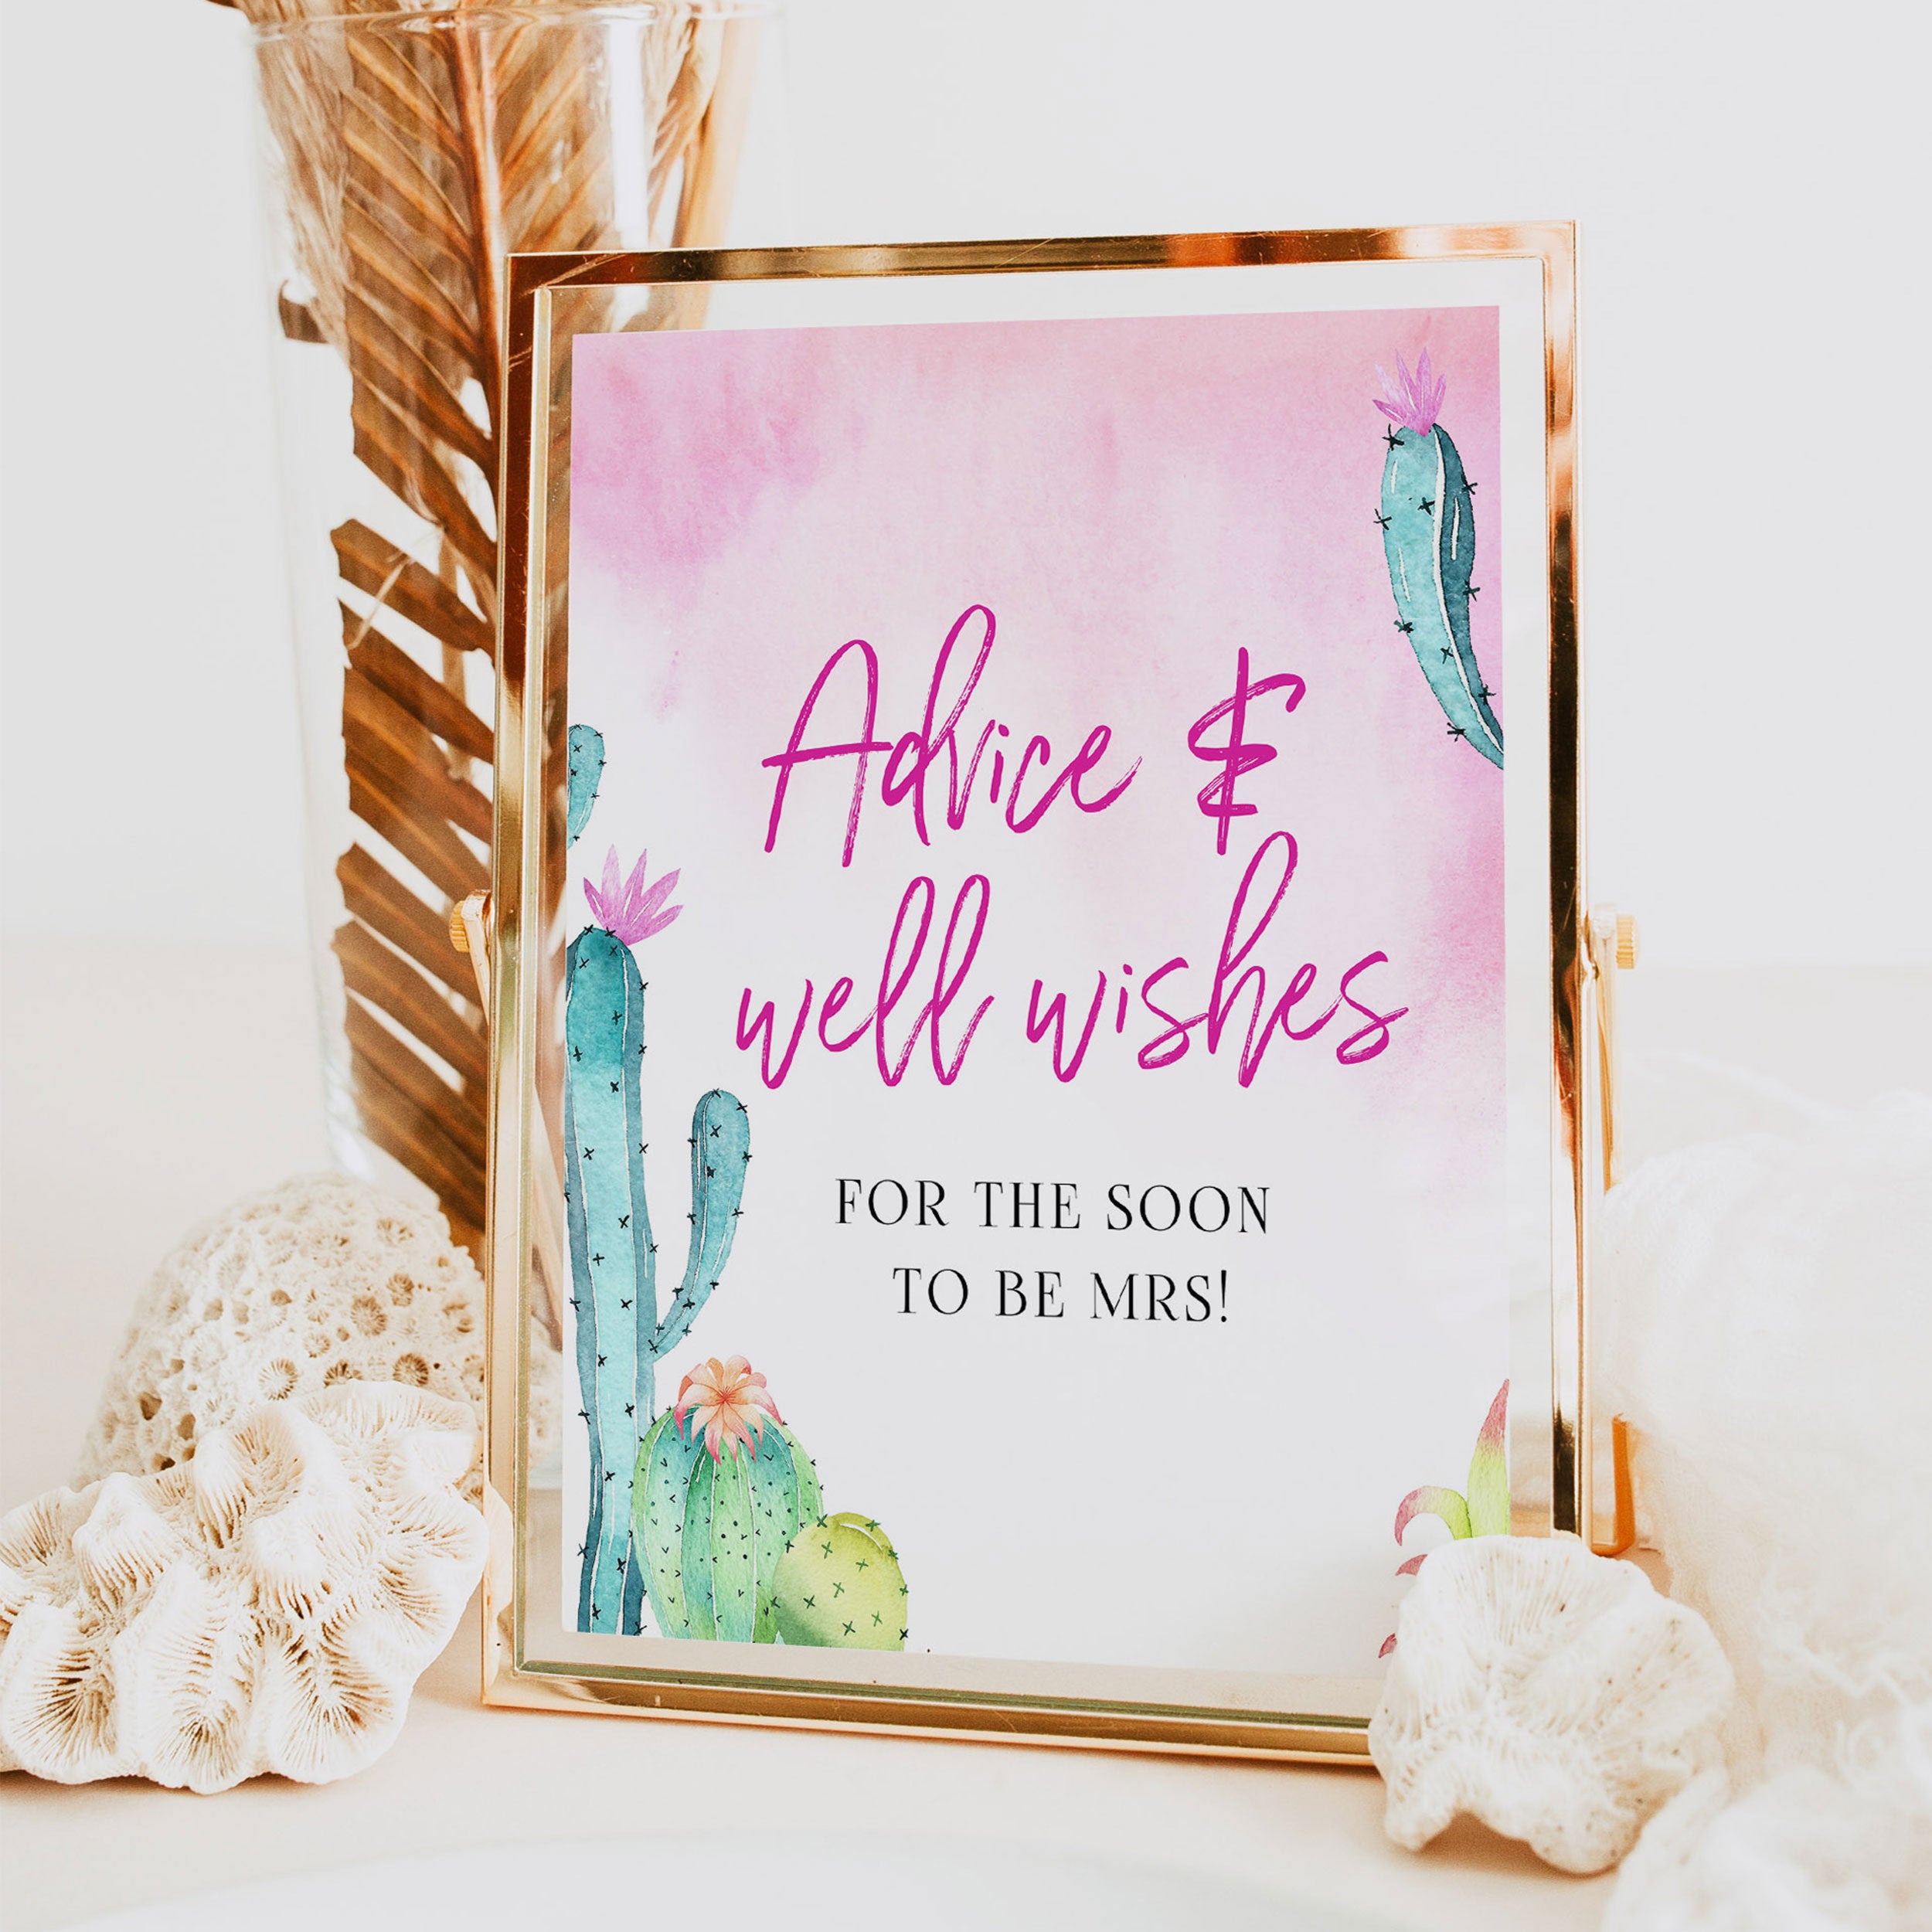 Advice & Well Wishes Sign - Fiesta